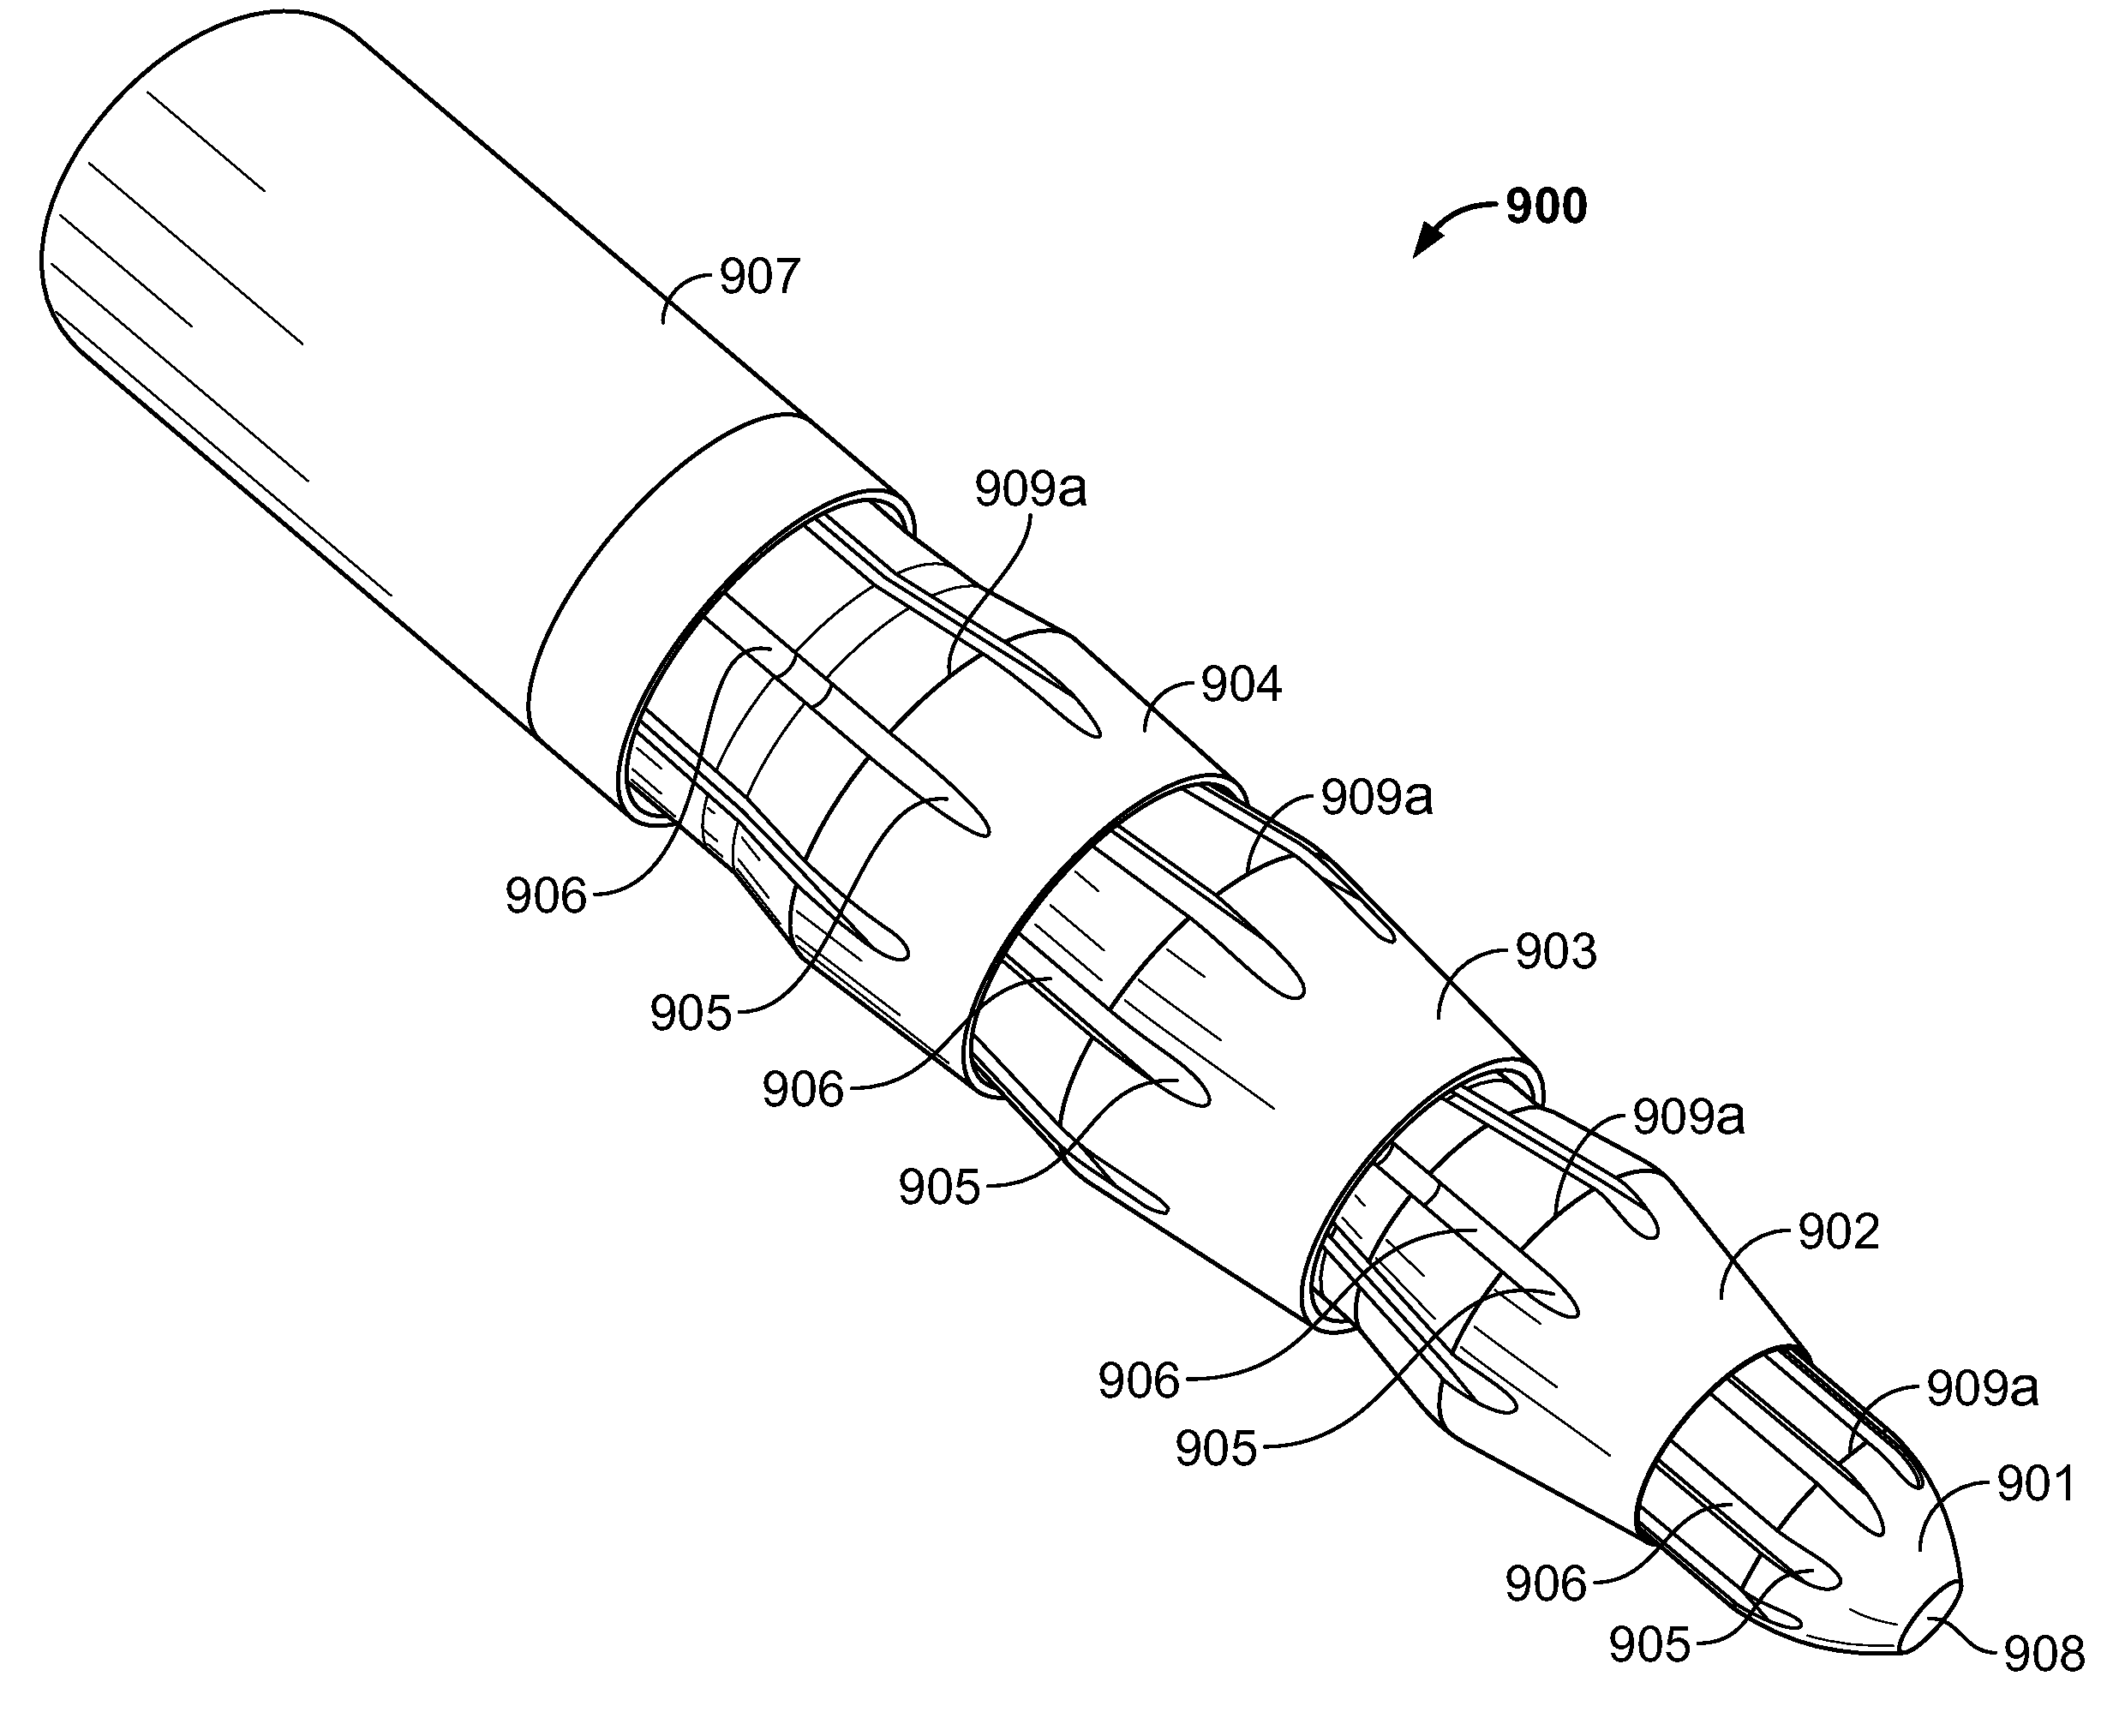 Electroporation device with improved tip and electrode support